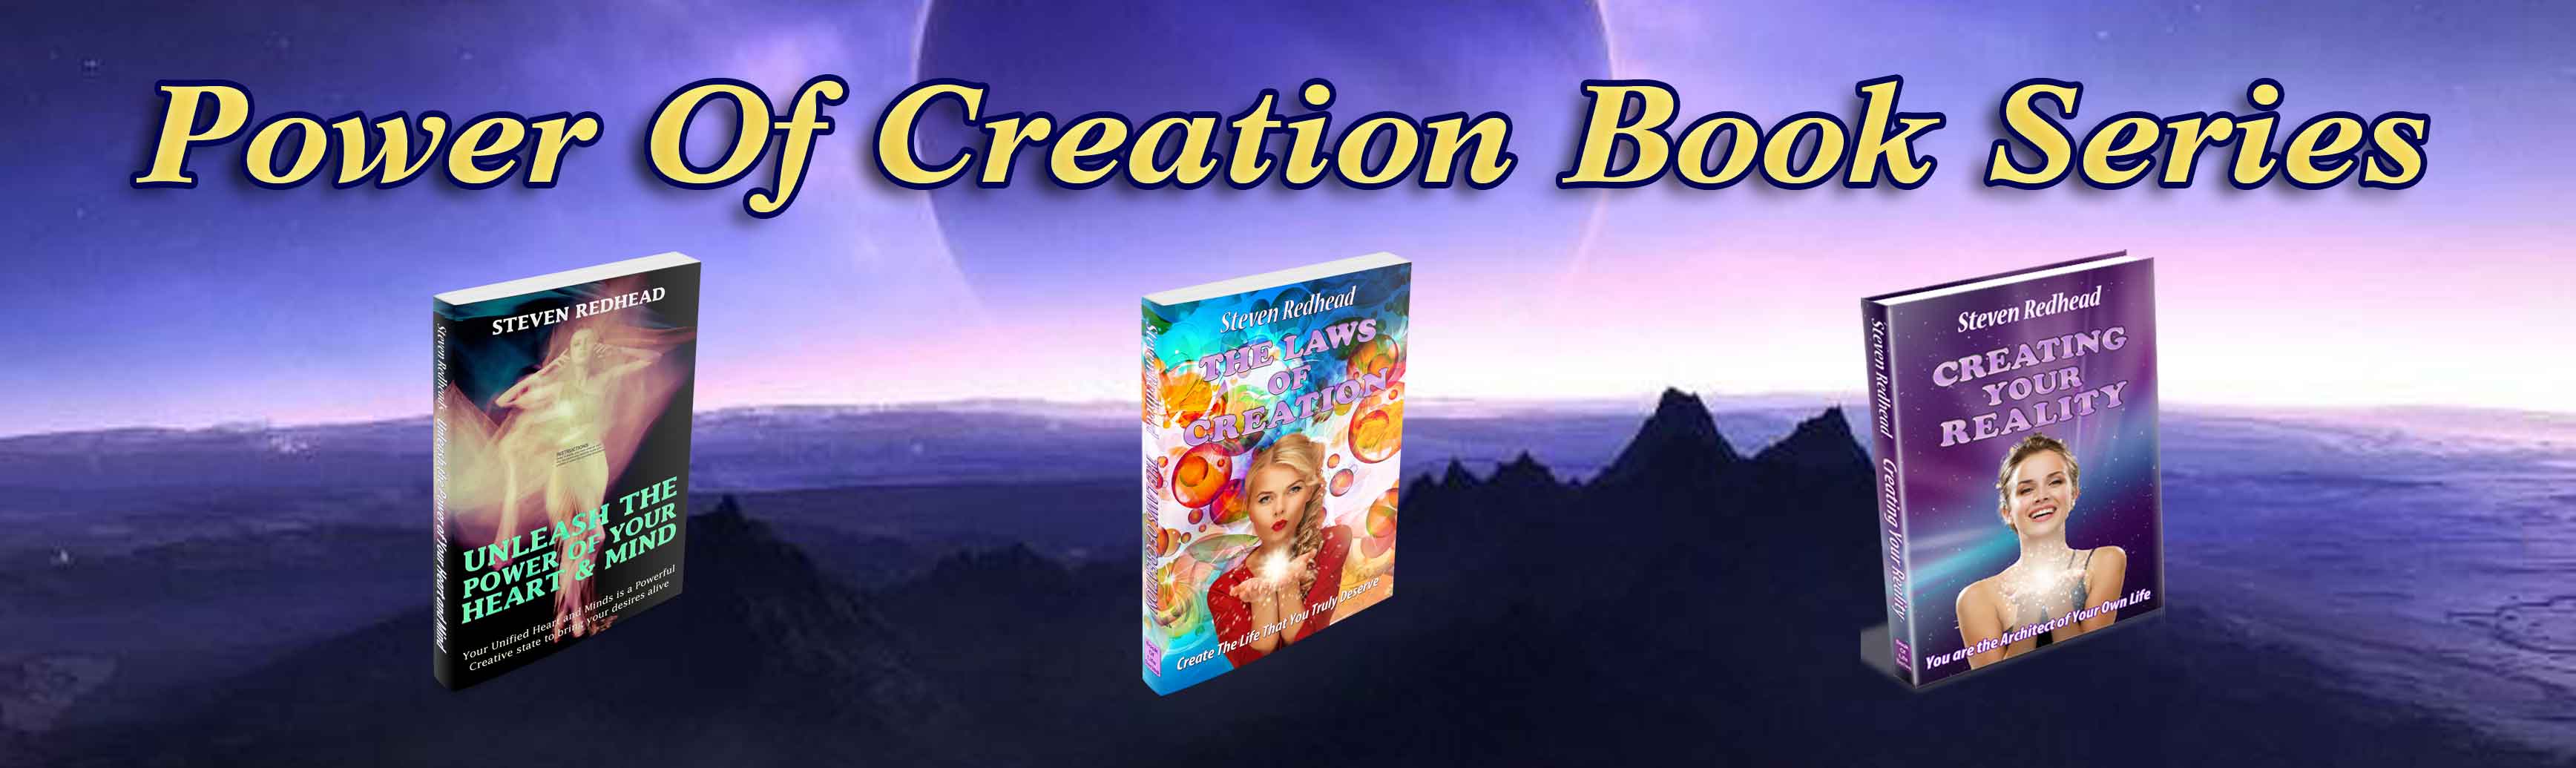 Power Of Creation Book Series